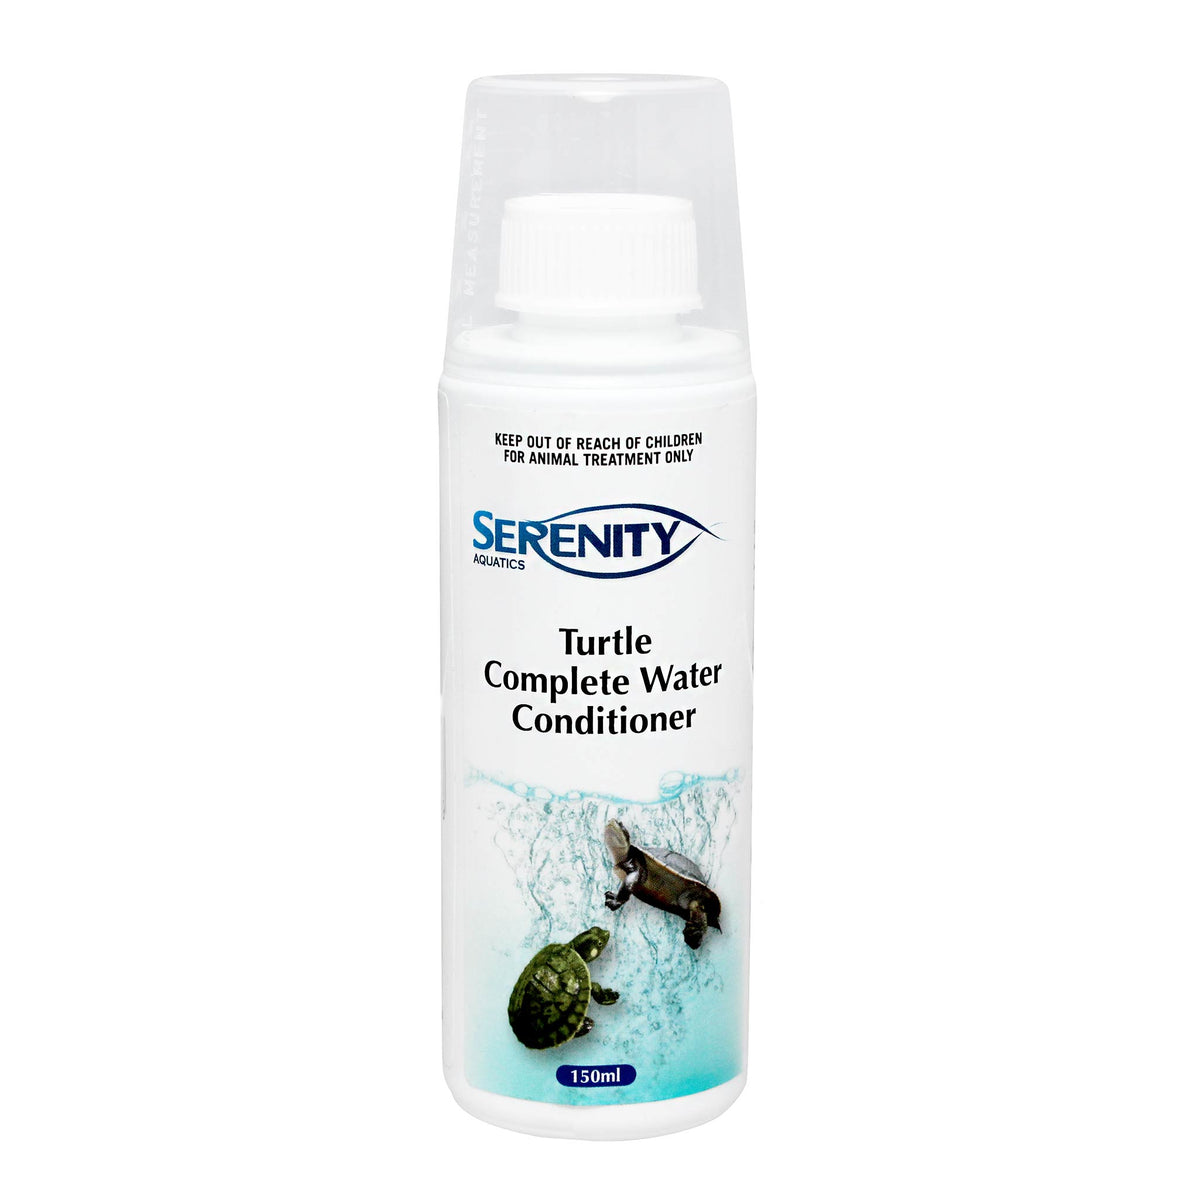 Serenity Turtle Complete Water Conditioner 150mL